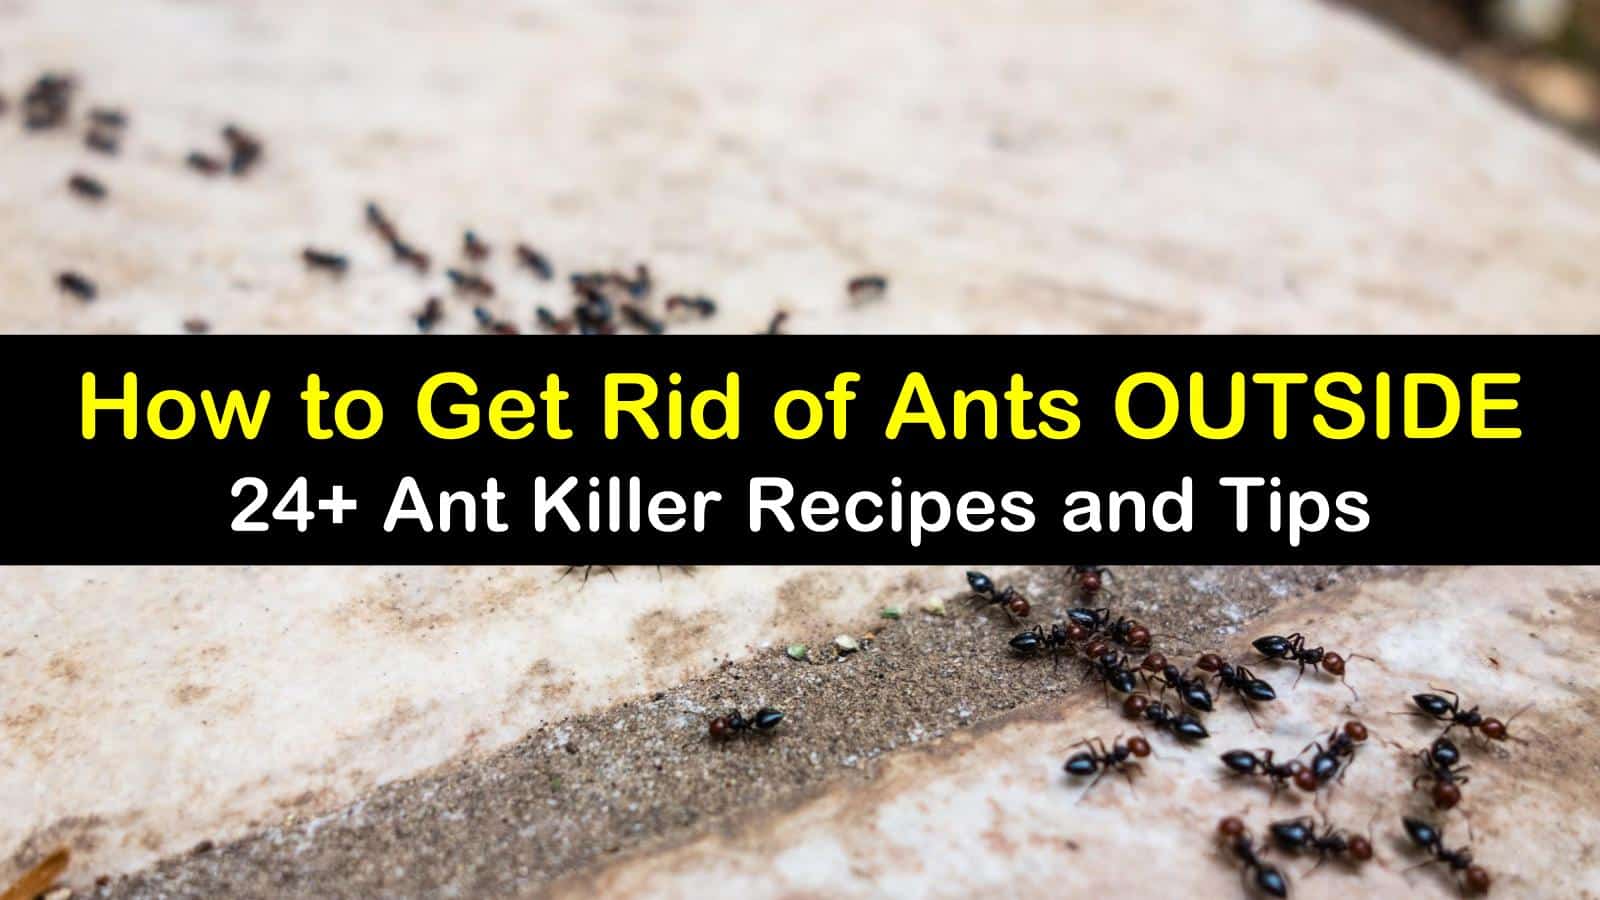 How to Get Rid of Ants Outside